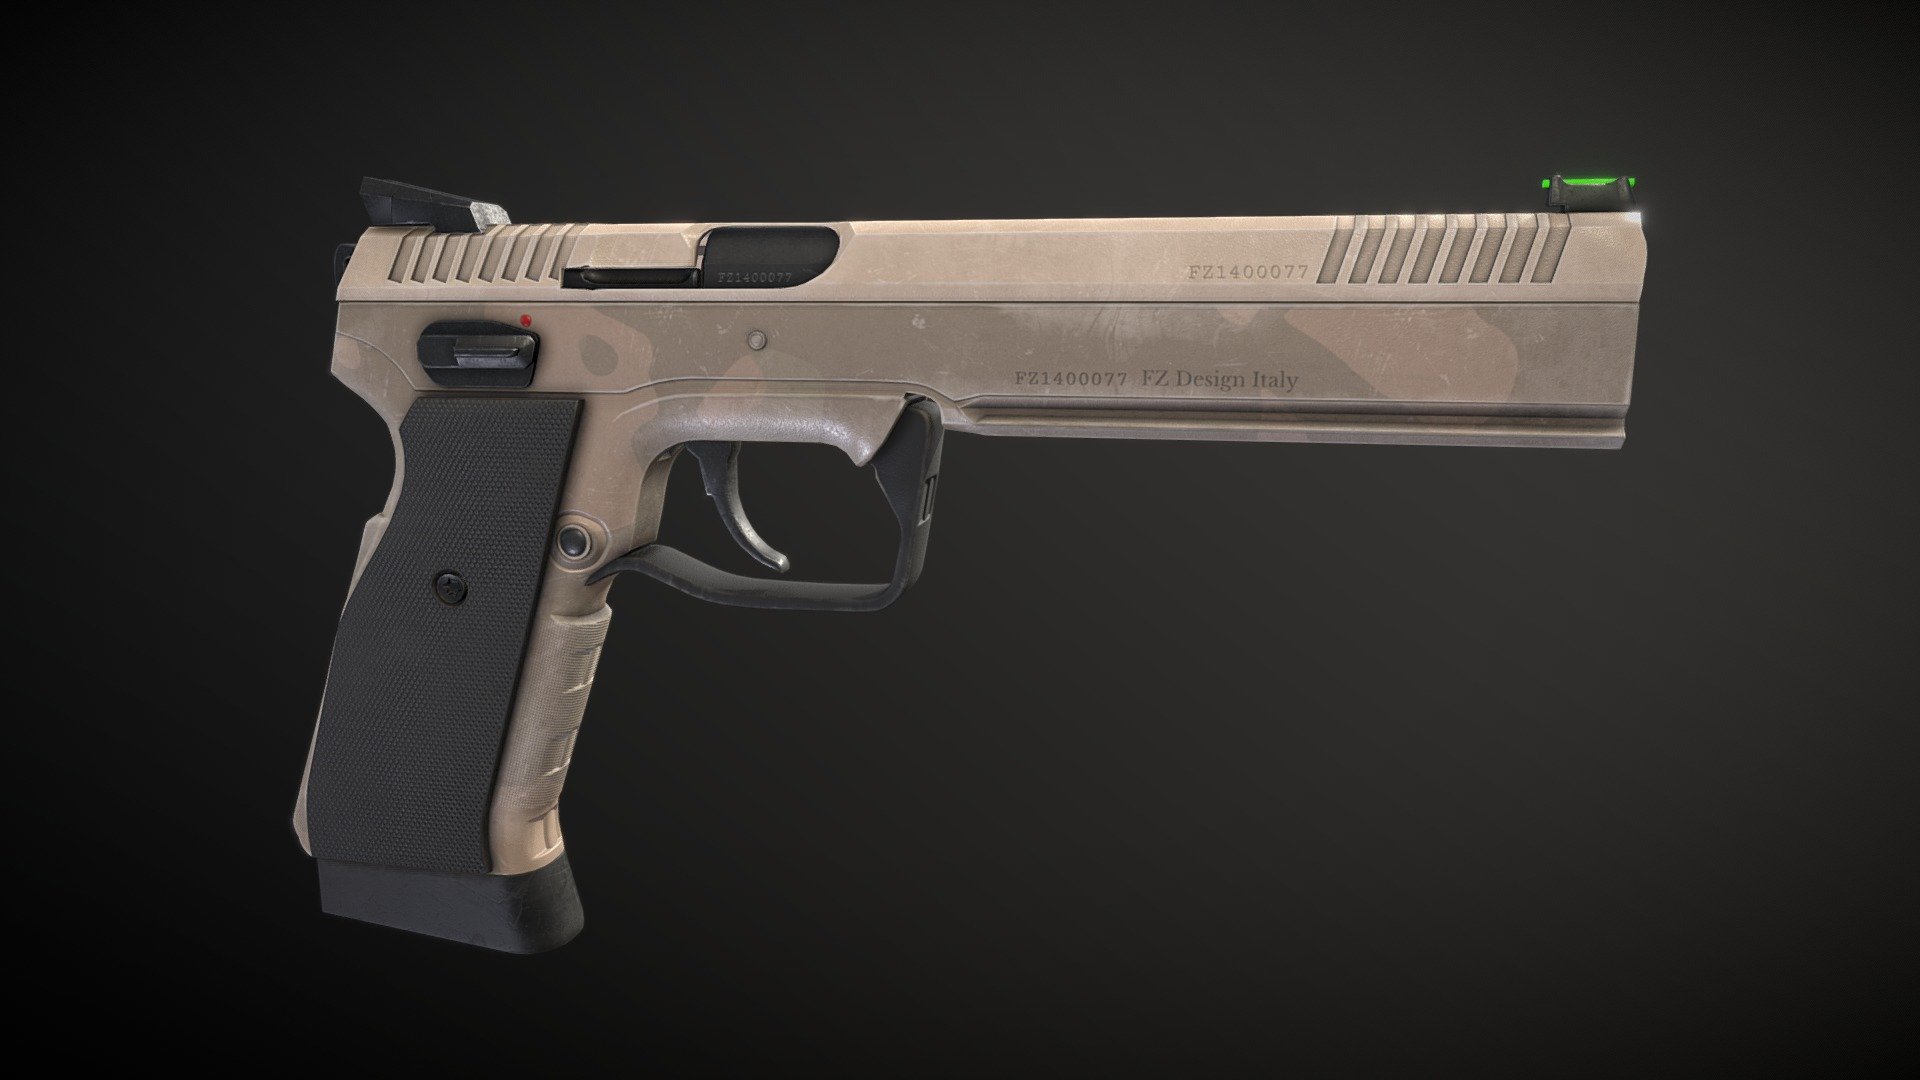 Generic Hi power Modern pistol. Heavy tactical Gun with desert tan polymer body.
just for fun.
This model has high detailed pbr textures.

model parts was textured together and can have occlusion issues on the hidden parts, but if you don't need to animate the parts like the magazine or the barrel, is good 3d model